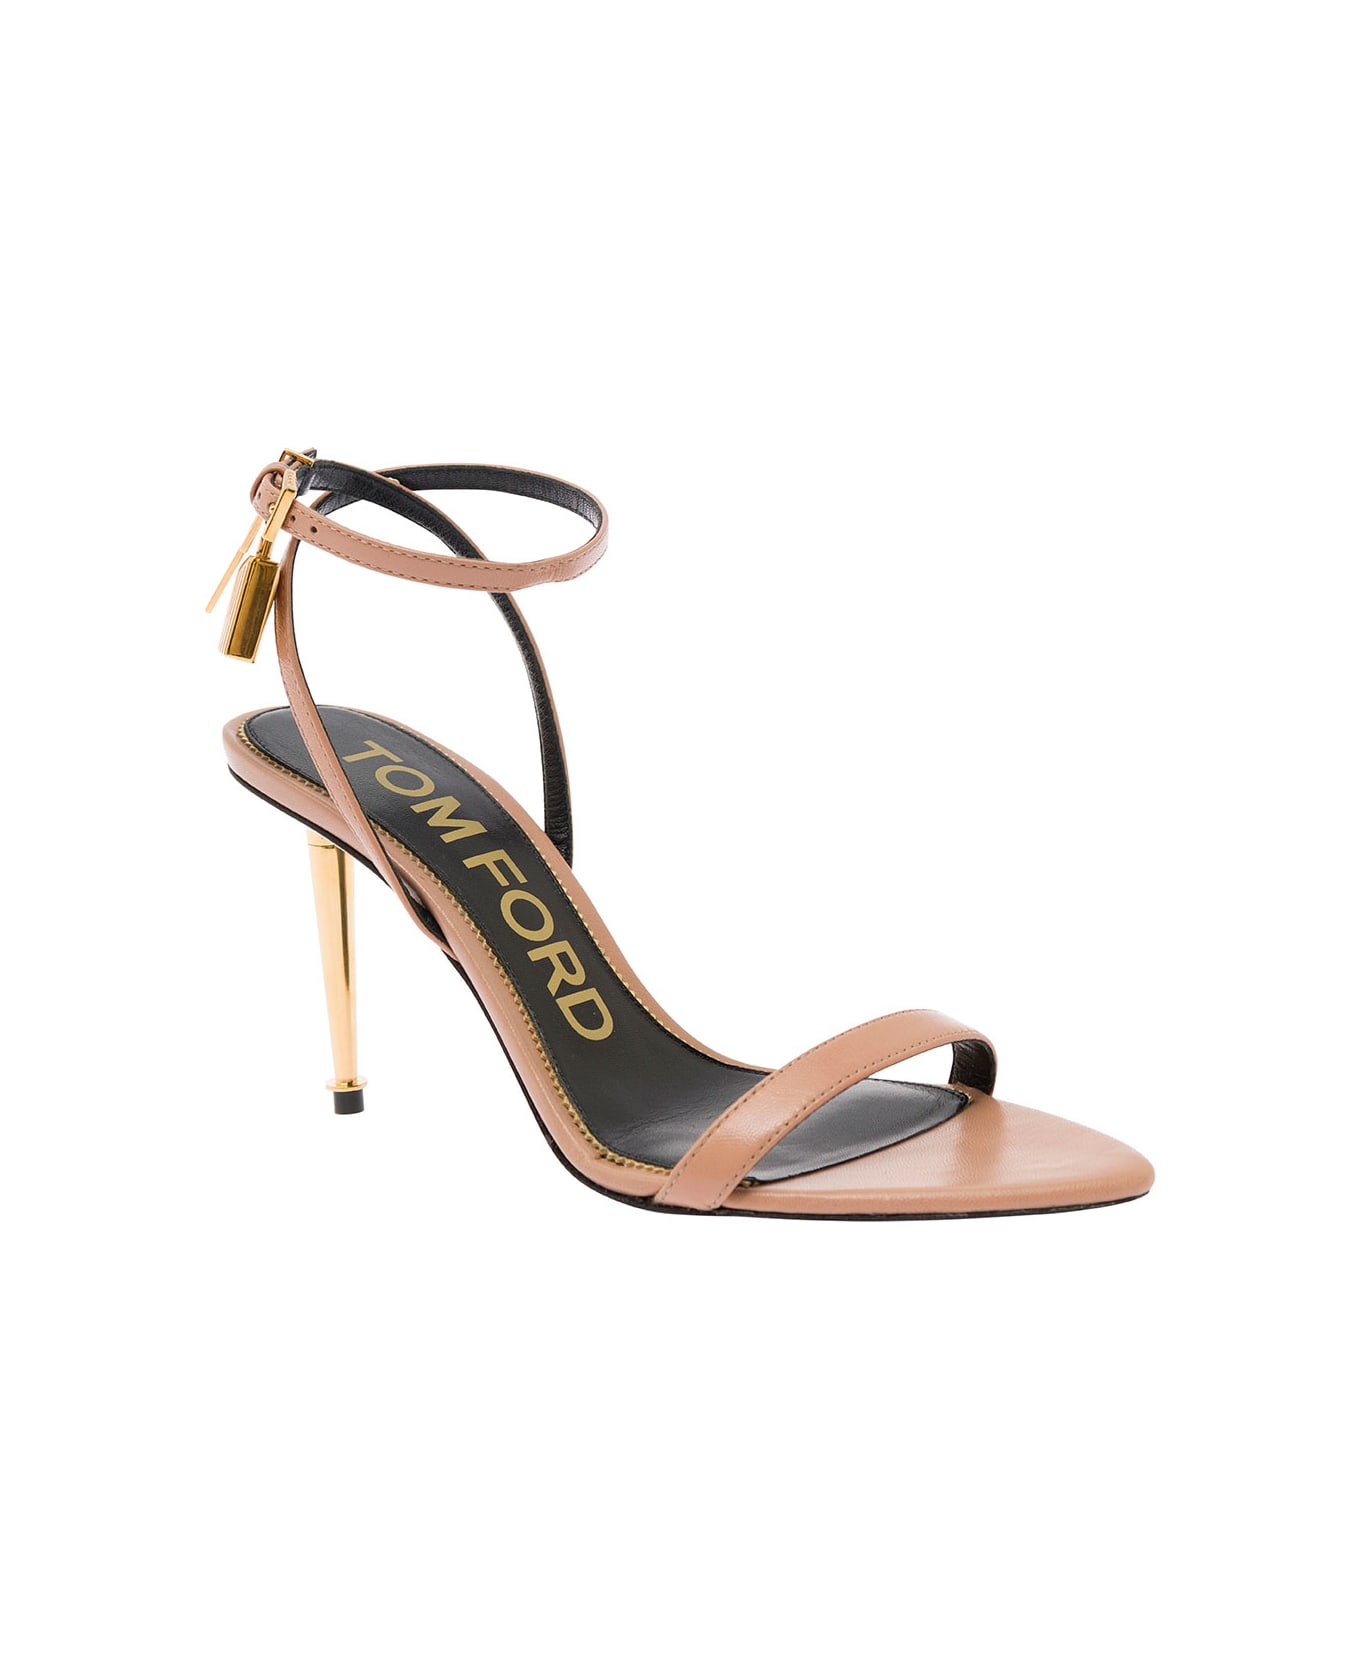 Tom Ford Pink Leather Sandals With Padlock Detail Tom Ford Woman - Metallic サンダル